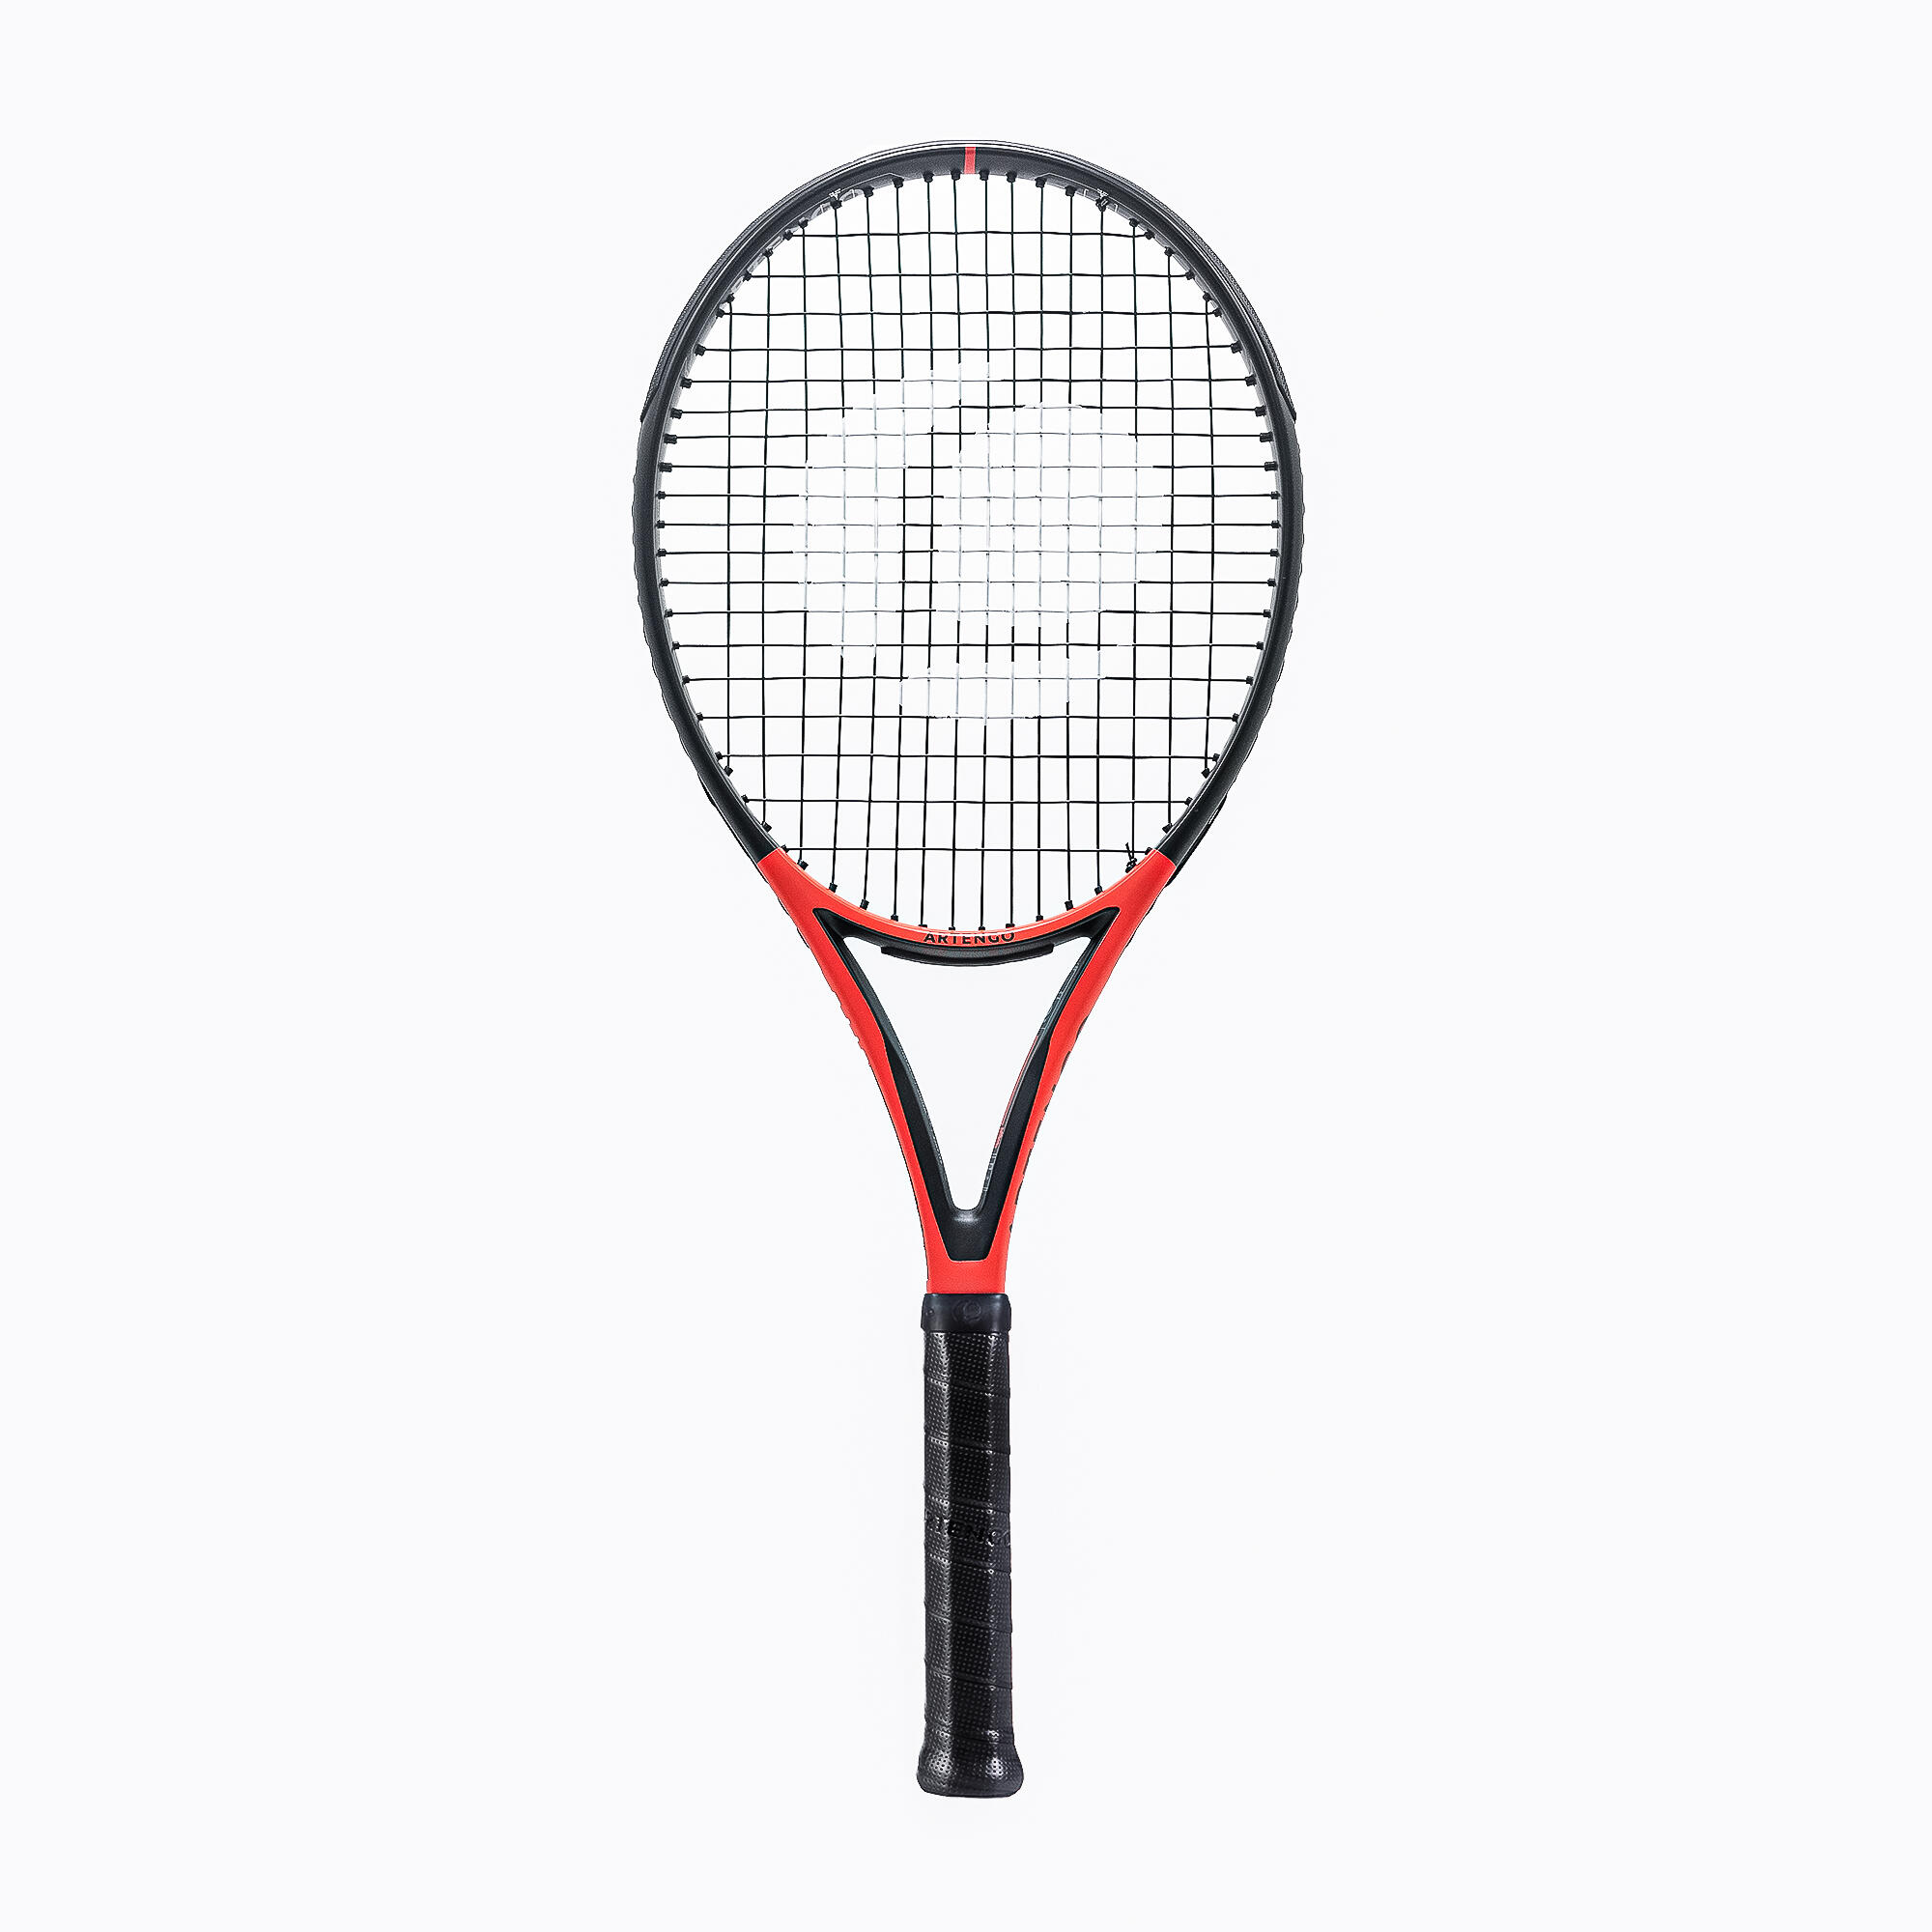 New 4-Player Racket FUN Outdoor Set Multicolored Wind/Water Resistant+The Glow in The Dark Option 